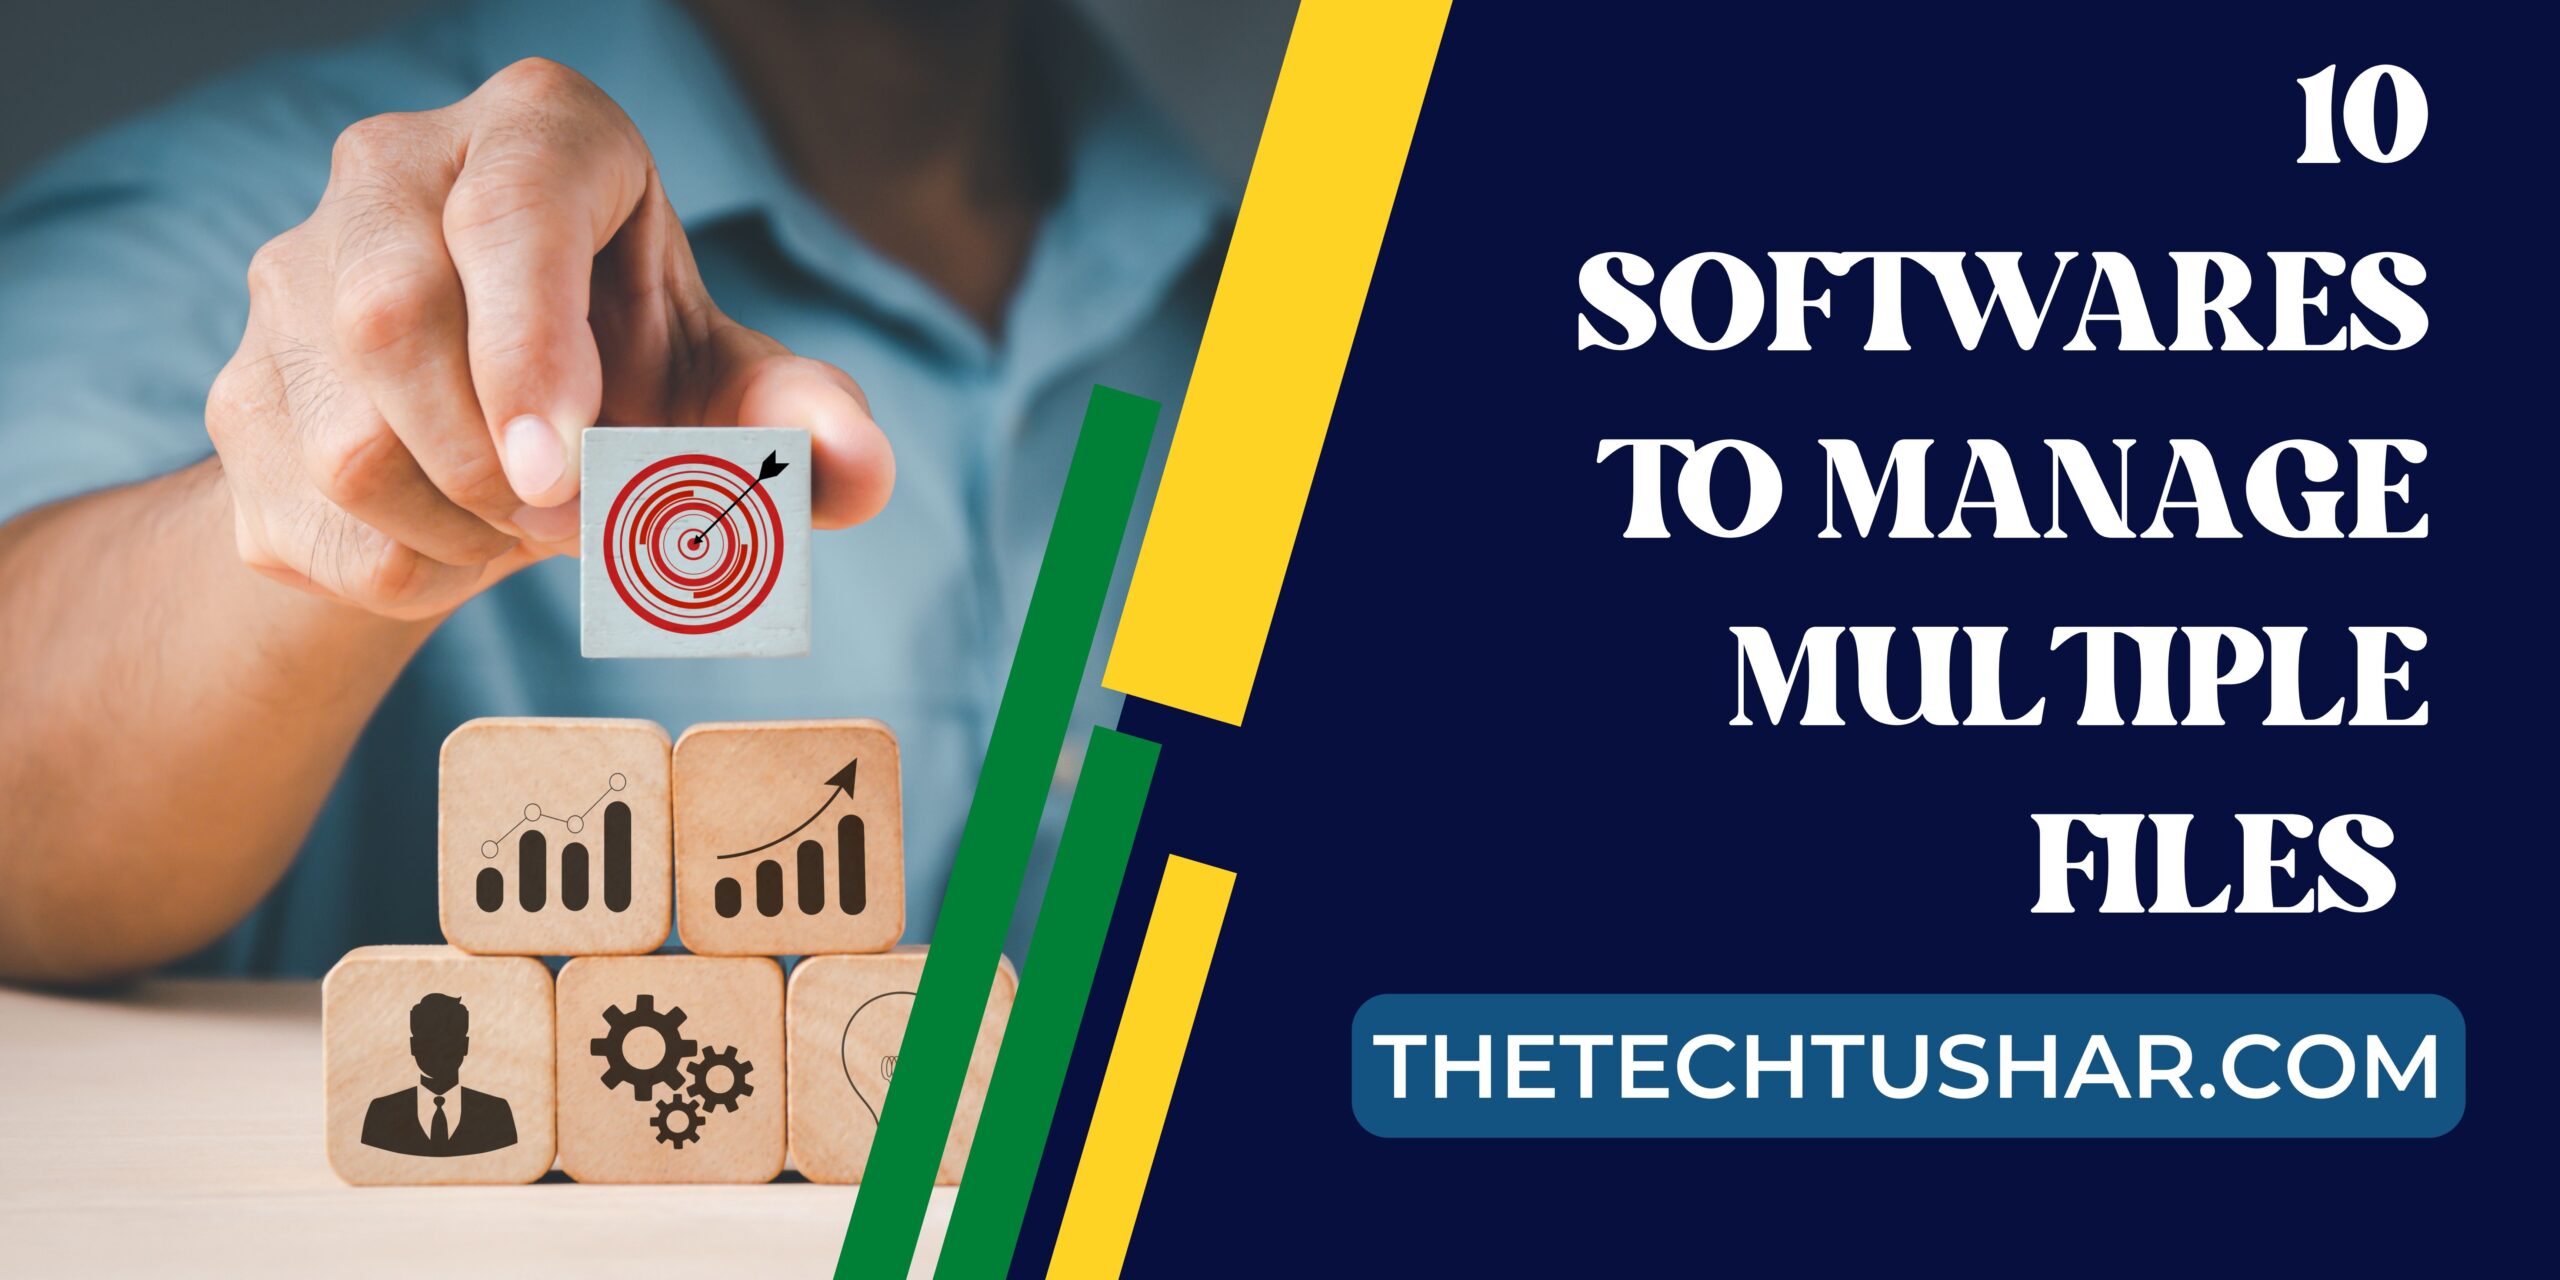 10 Softwares To Manage Multiple Files |10 Softwares To Manage Multiple Files |Tushar|Thetechtushar